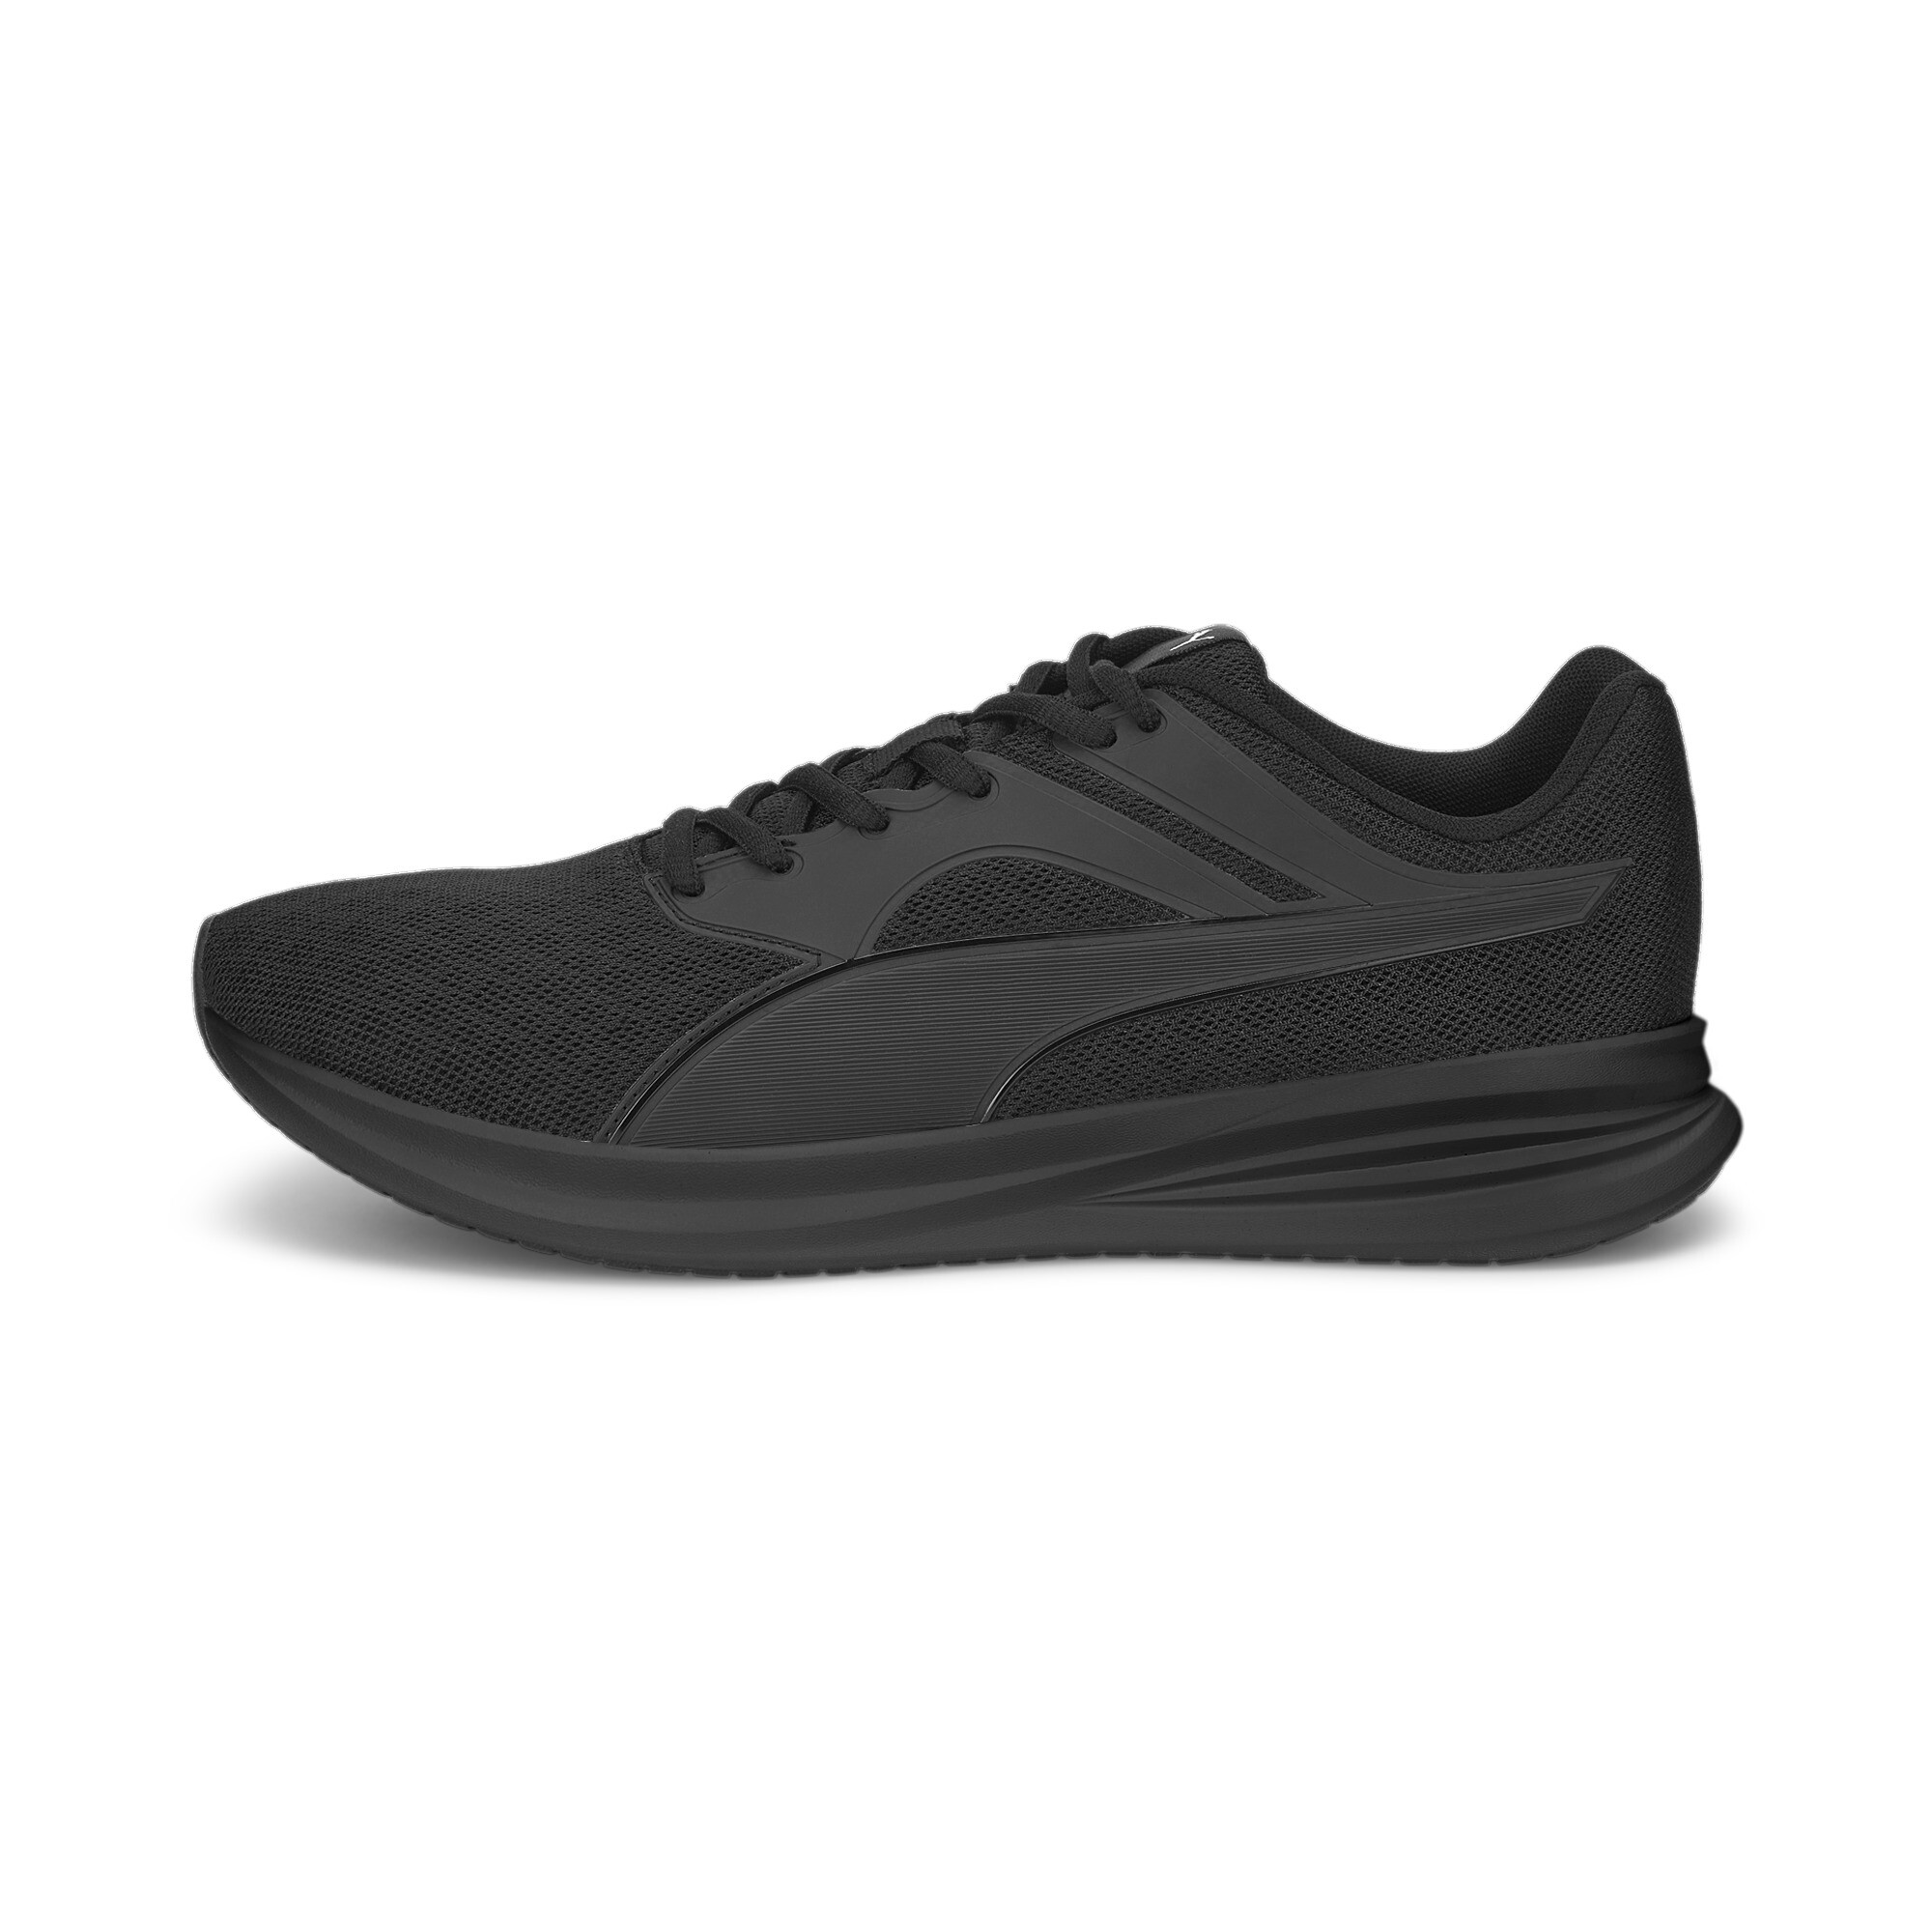 Puma Transport Running Shoes, Black, Size 42.5, Shoes